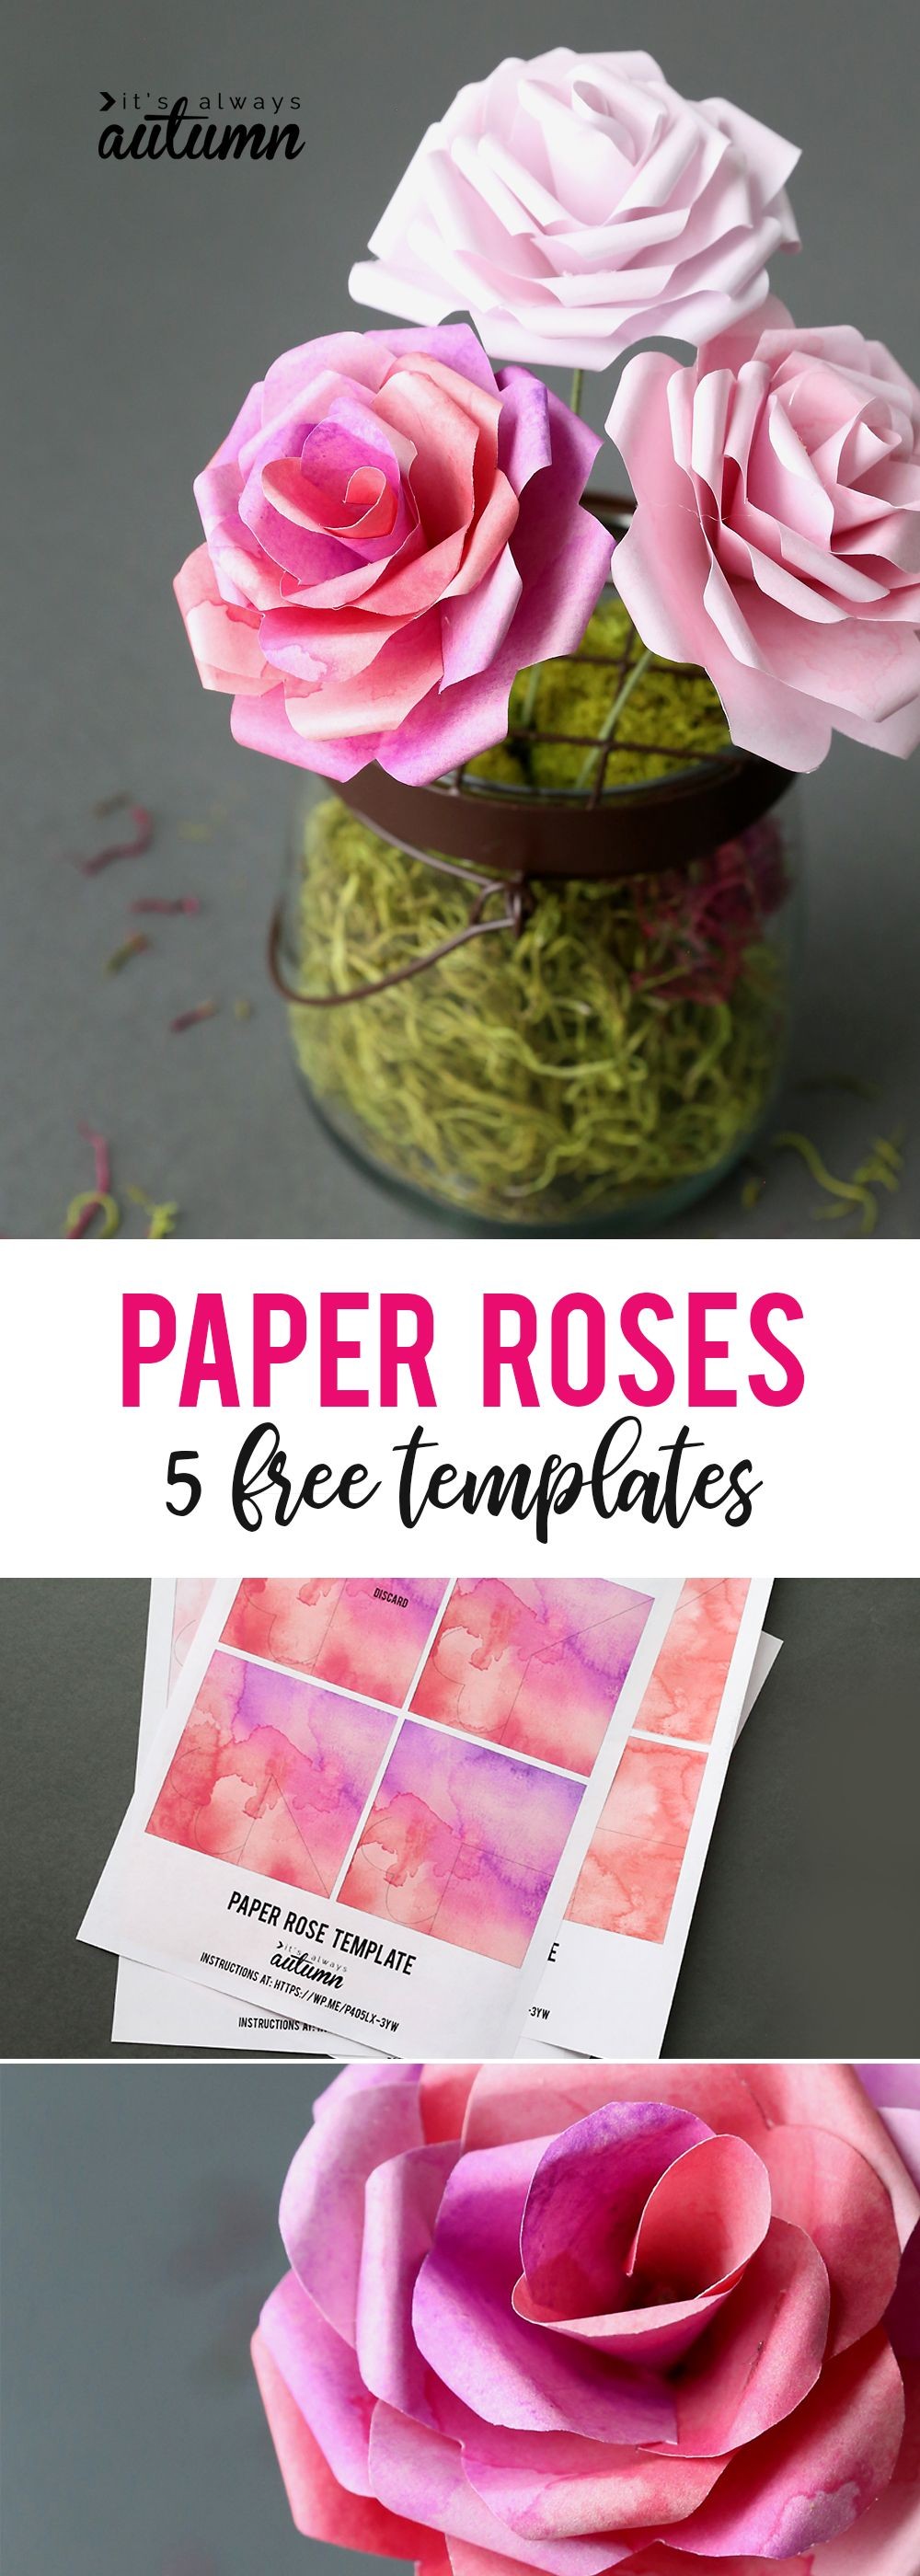 Flower Papercraft Make Gorgeous Paper Roses with This Free Paper Rose Template